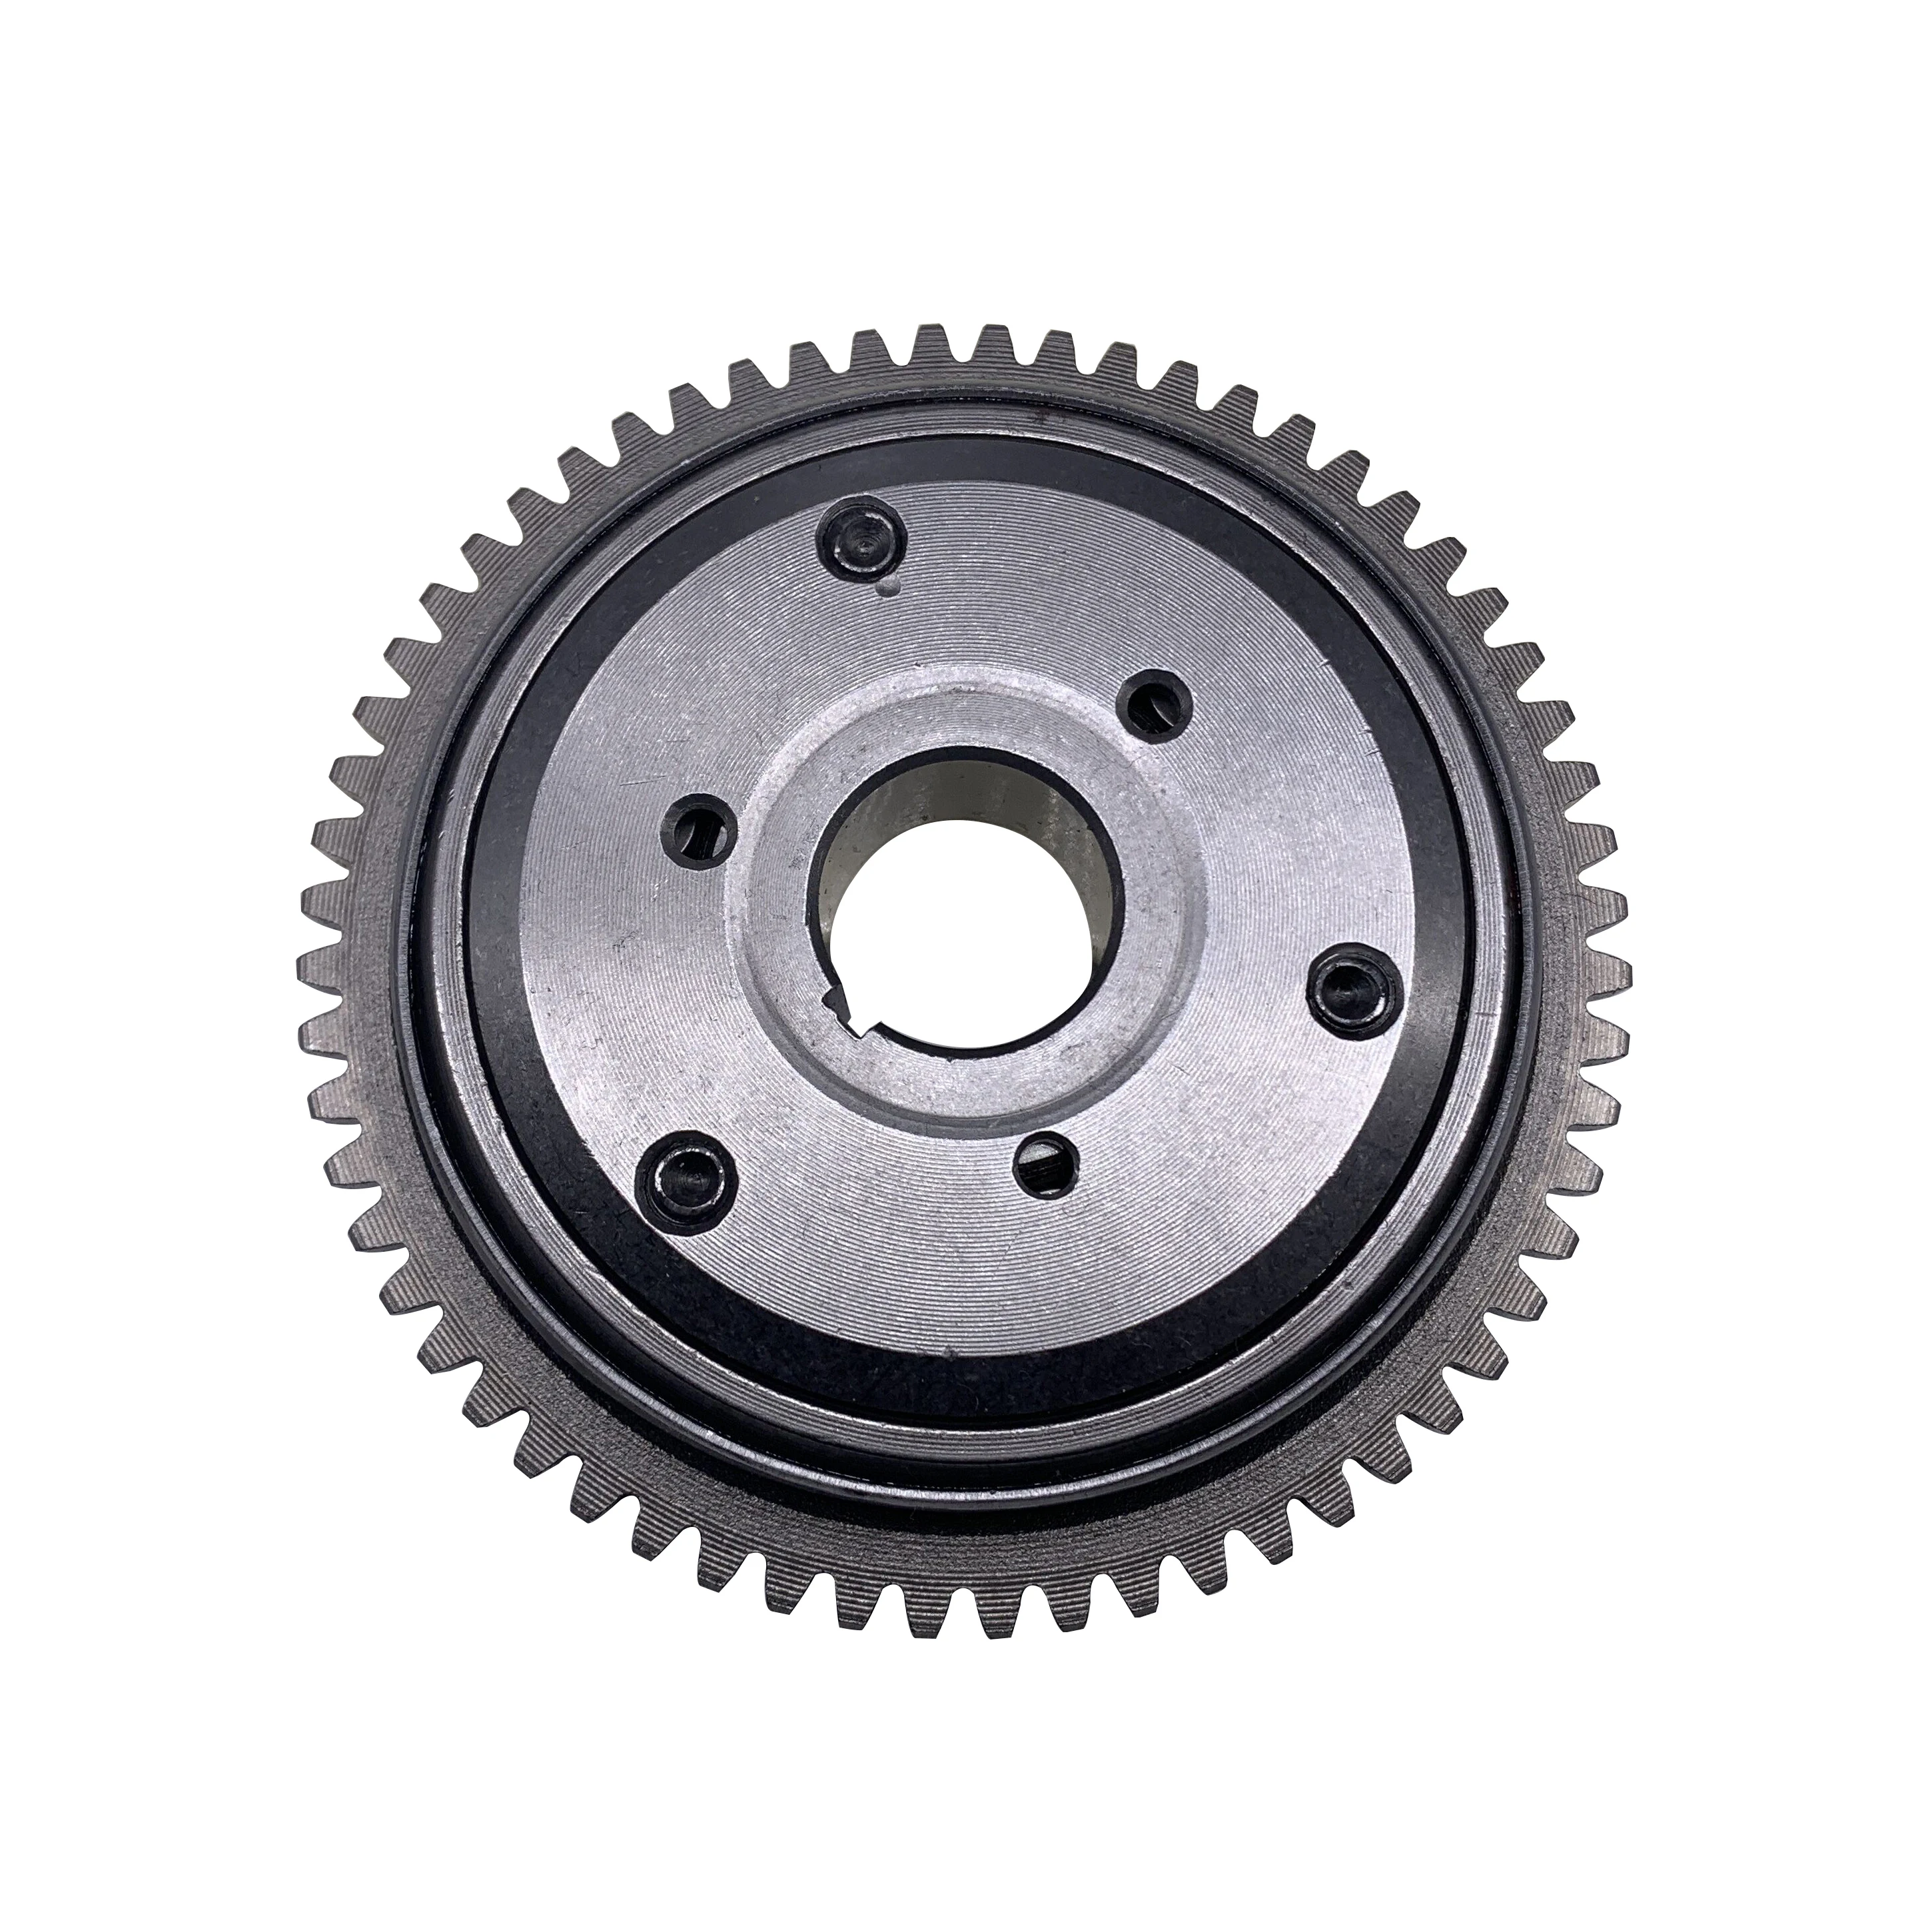 

Starter Clutch Gear Assembly for Scooter Moped 4 Stroke GY6 125cc 150cc 152QMI 157QMJ ATV Go-Kart Scooter